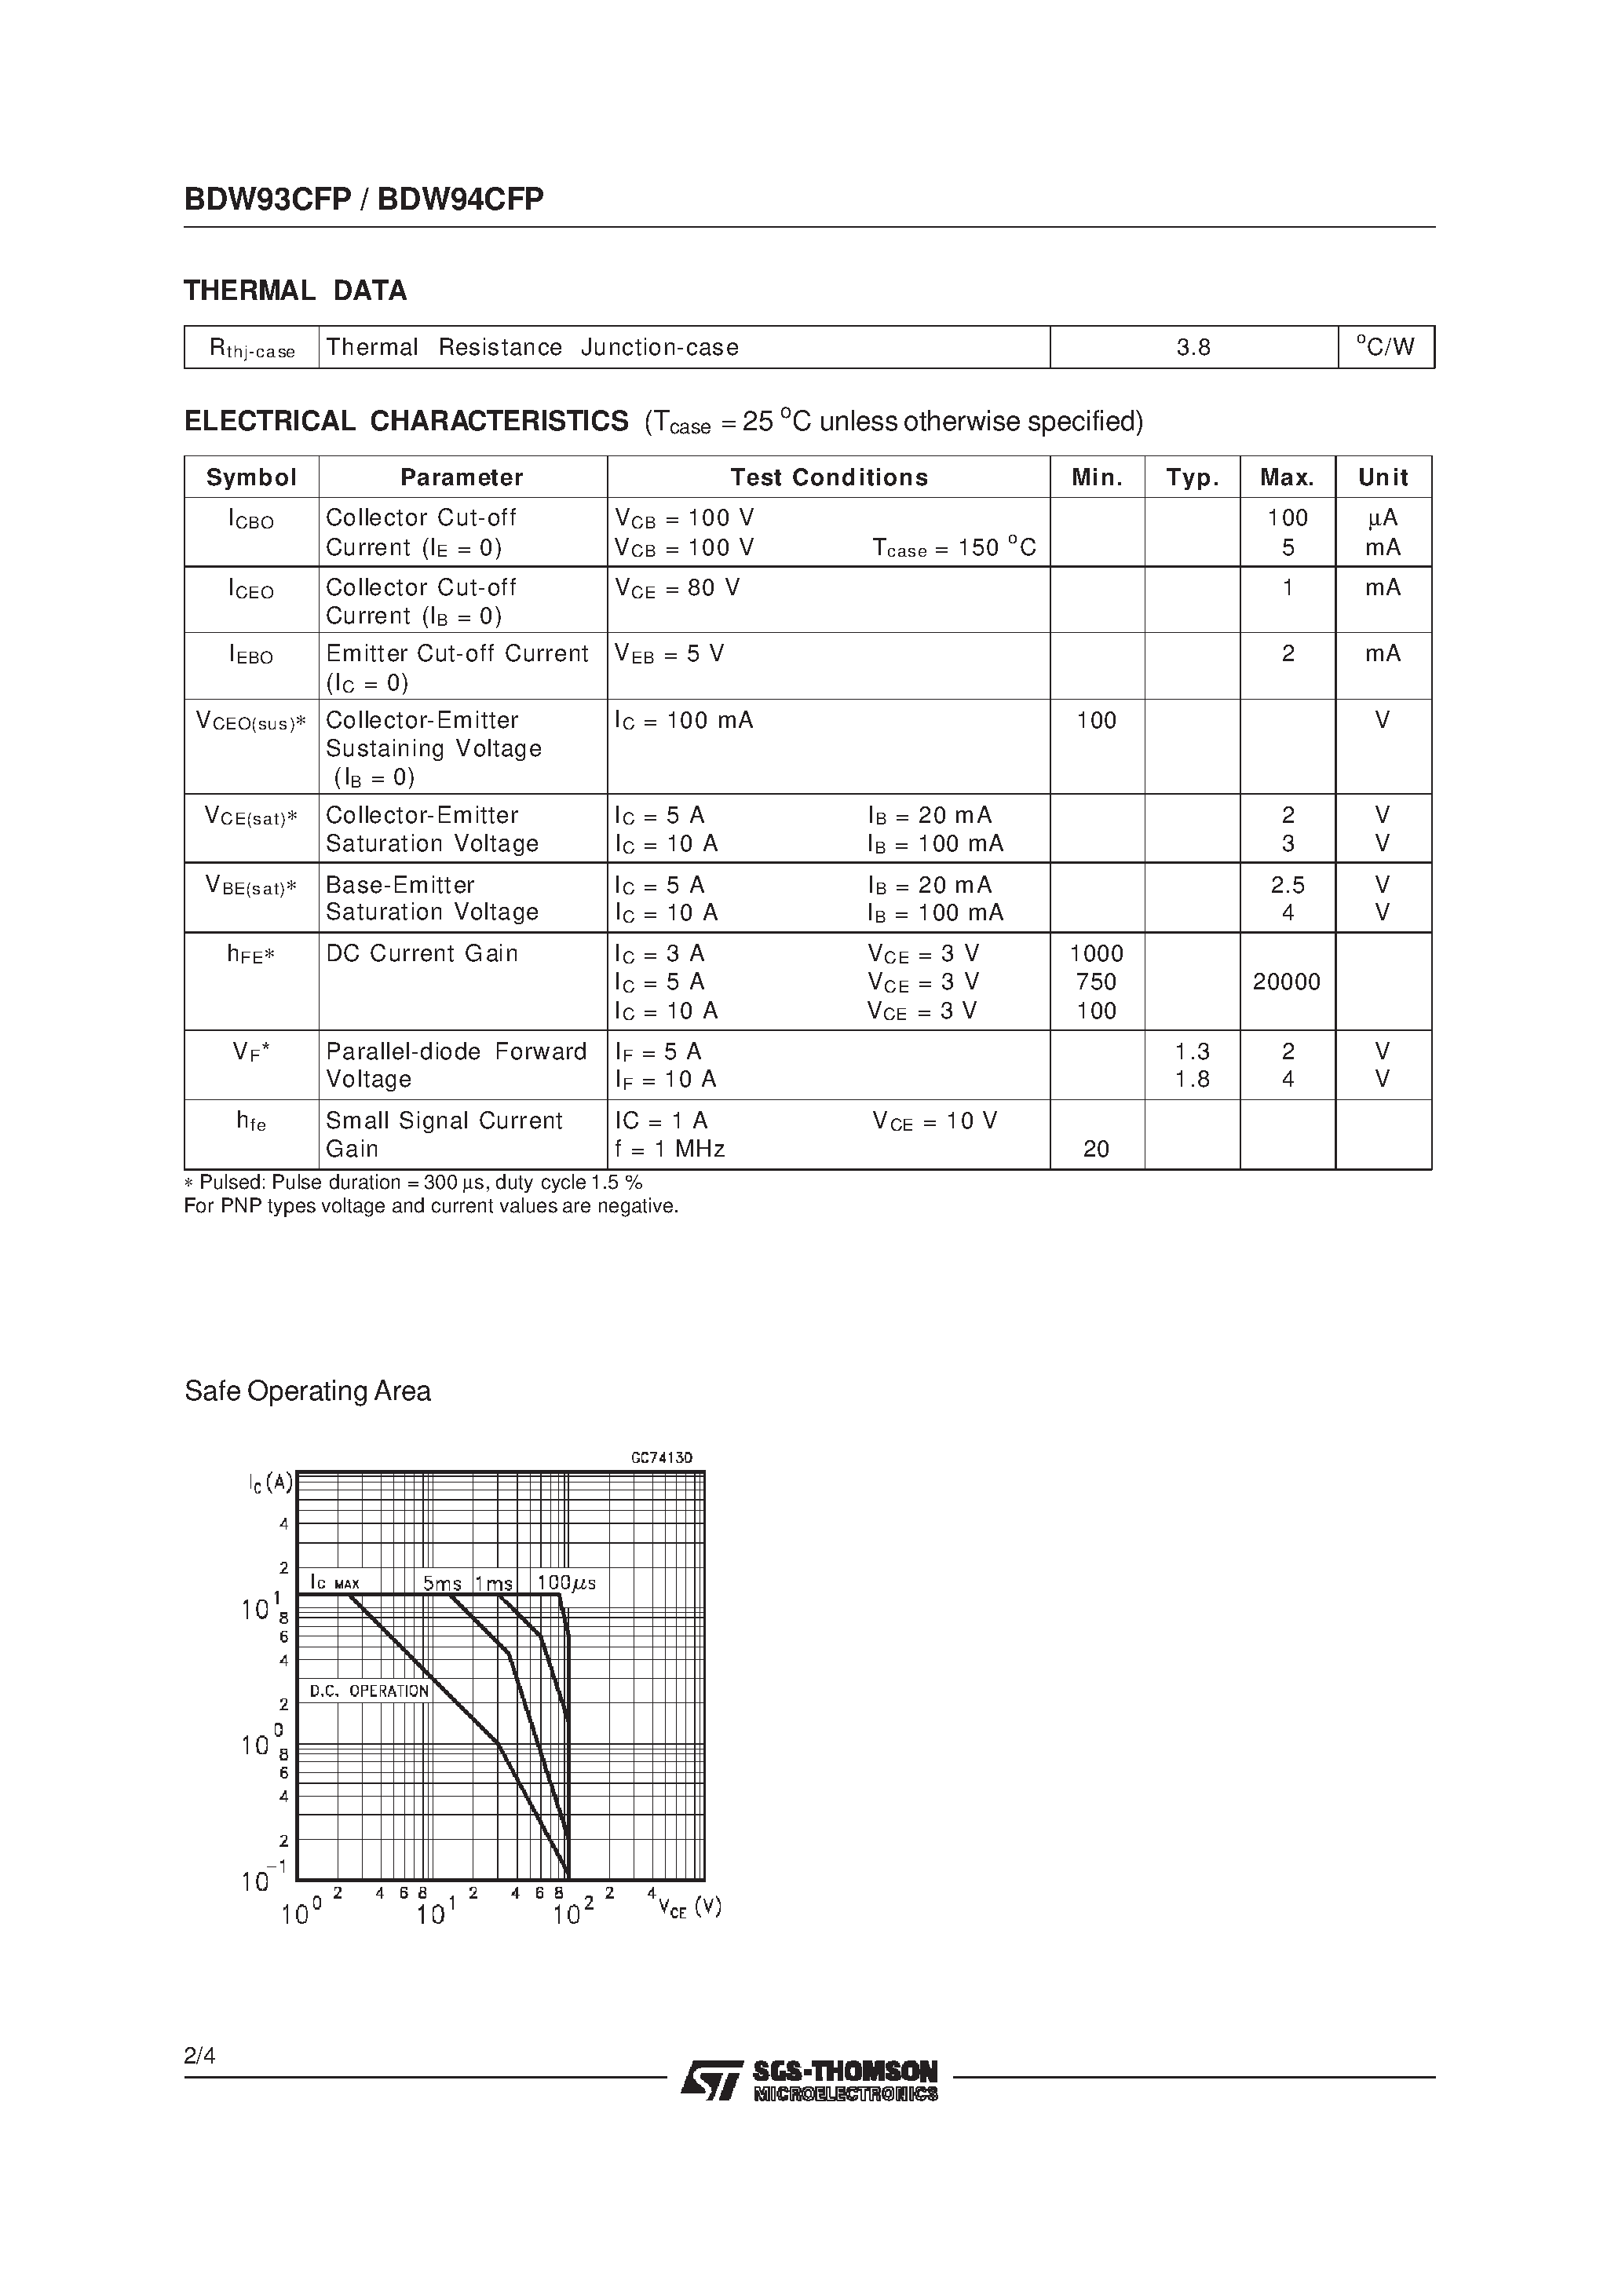 Datasheet BDW94CFP - COMPLEMENTARY SILICON POWER DARLINGTON TRANSISTORS page 2